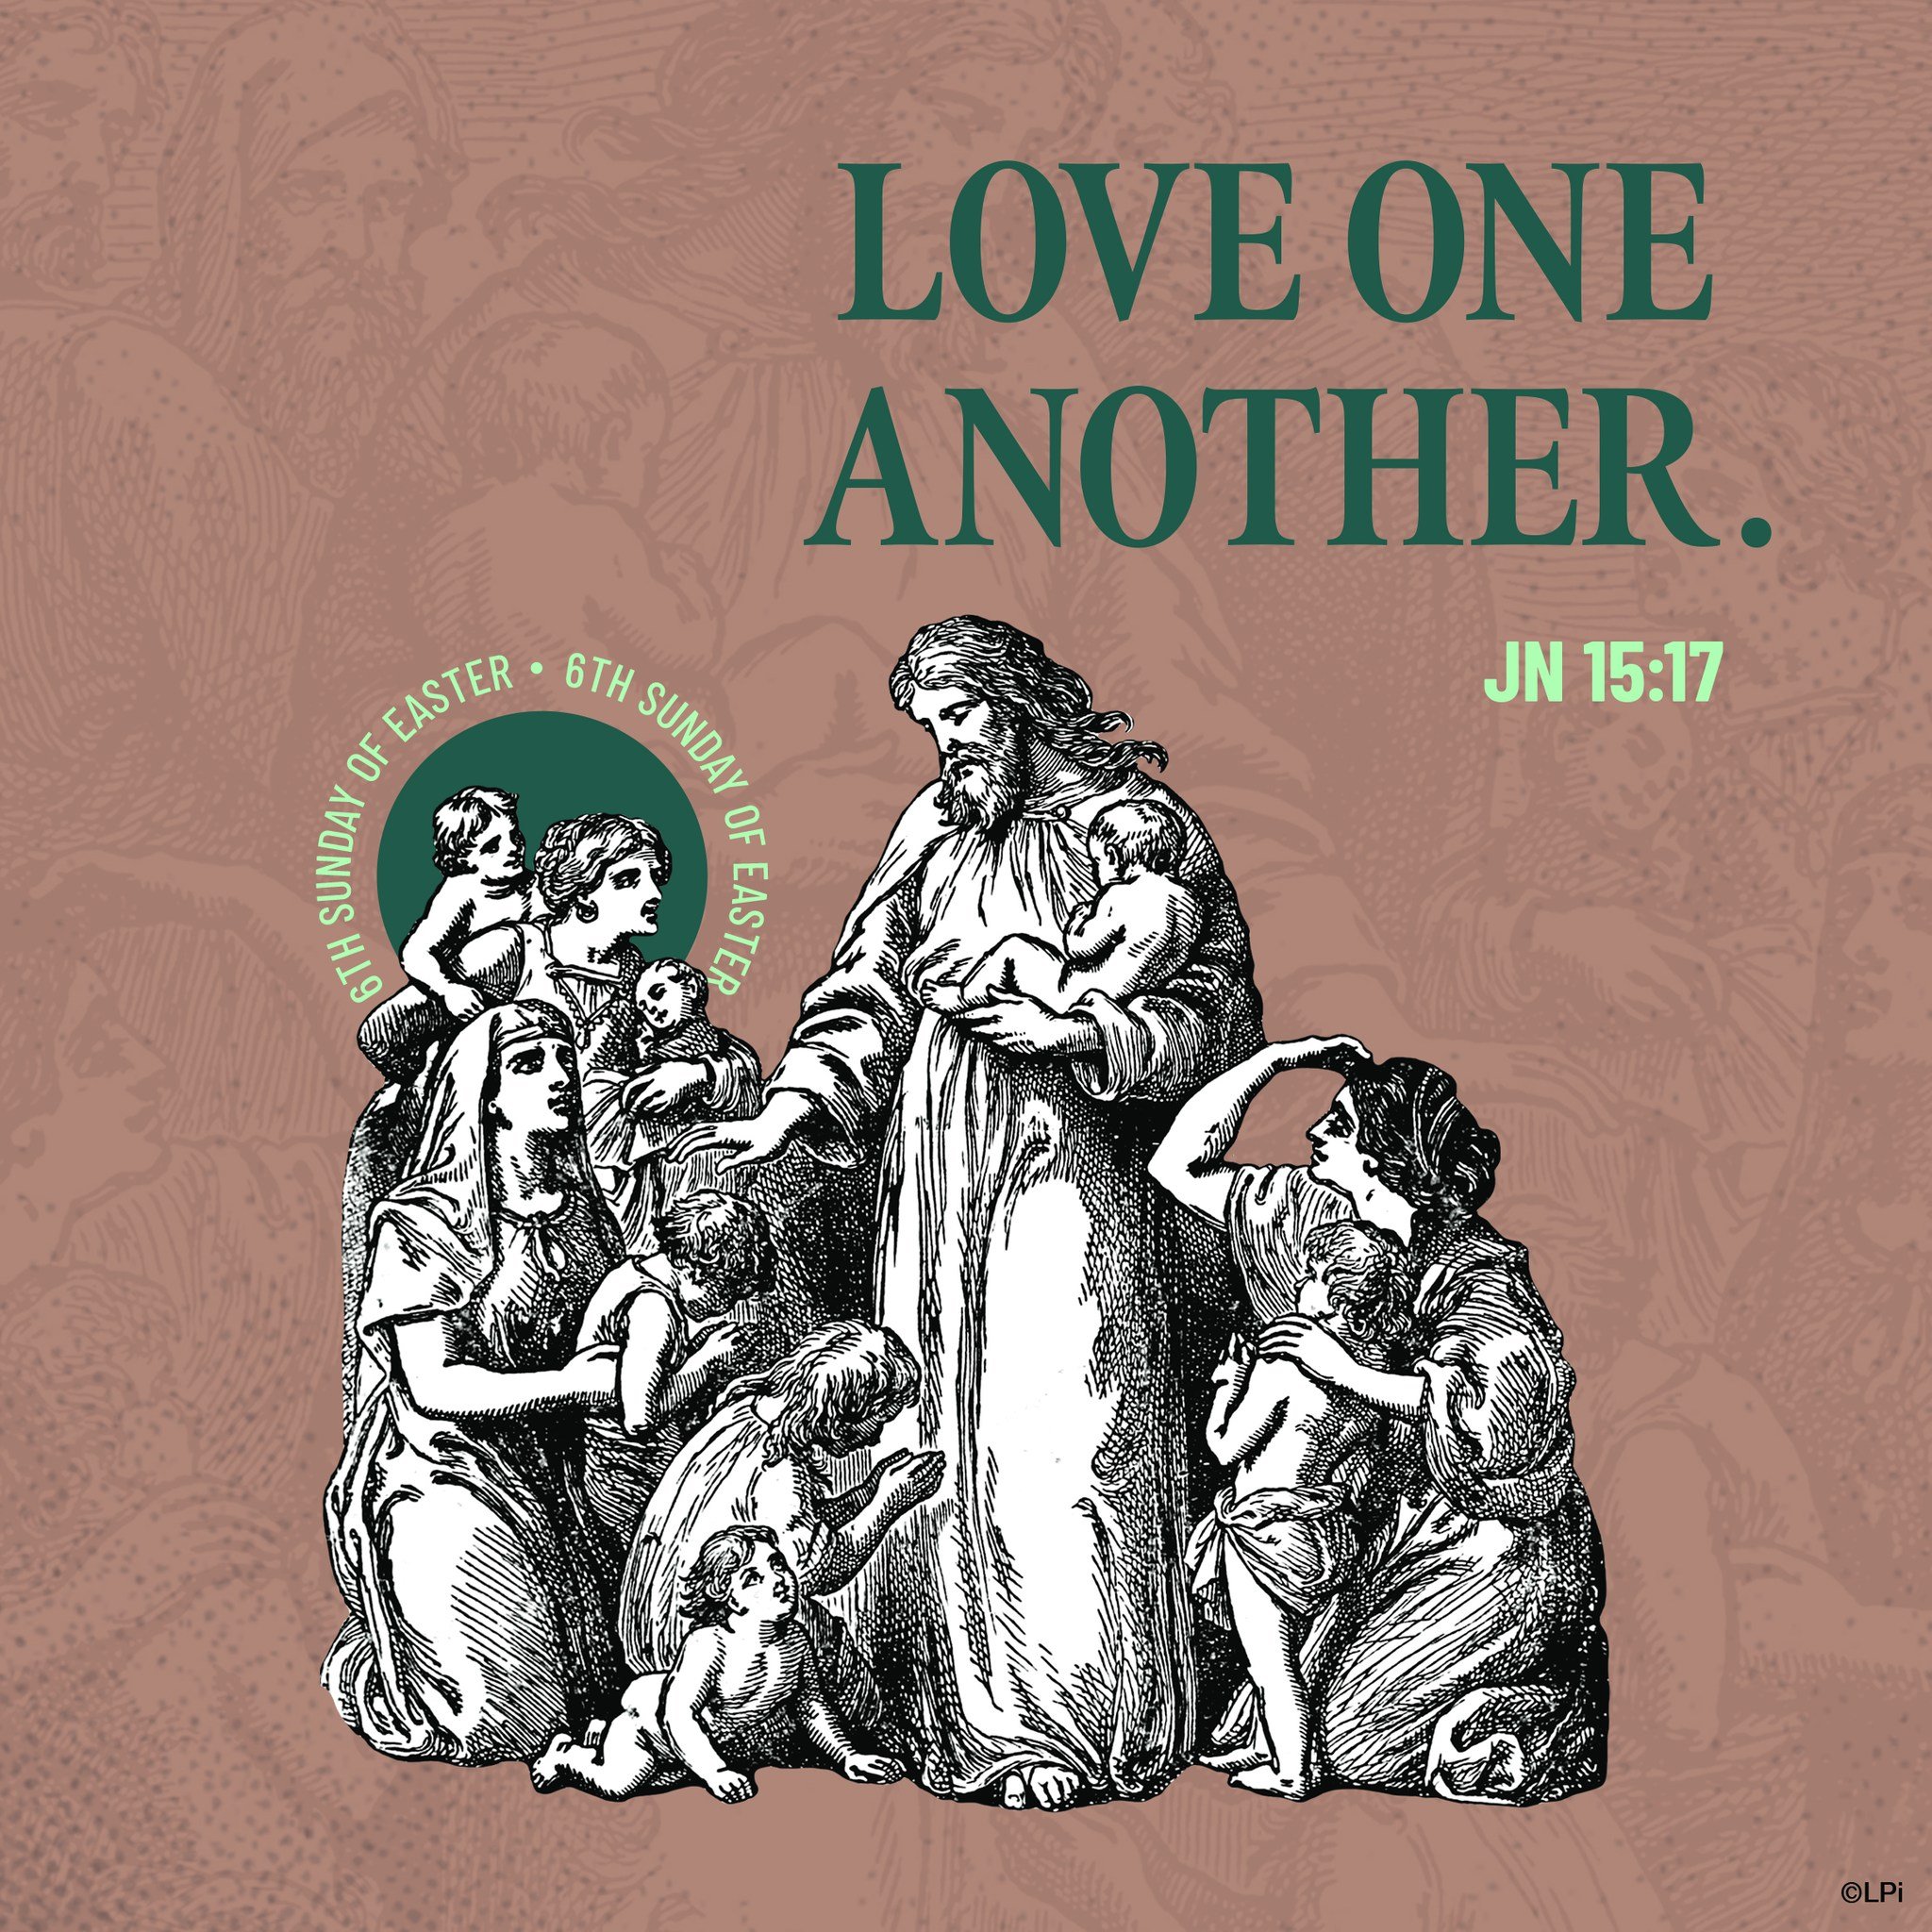 This weekend is the 6th Sunday of Easter. In the second reading, John teaches us that the essence of God is love and we are called to love one another. Who might you work on loving this week? #saintpatrickchurchcarlisle